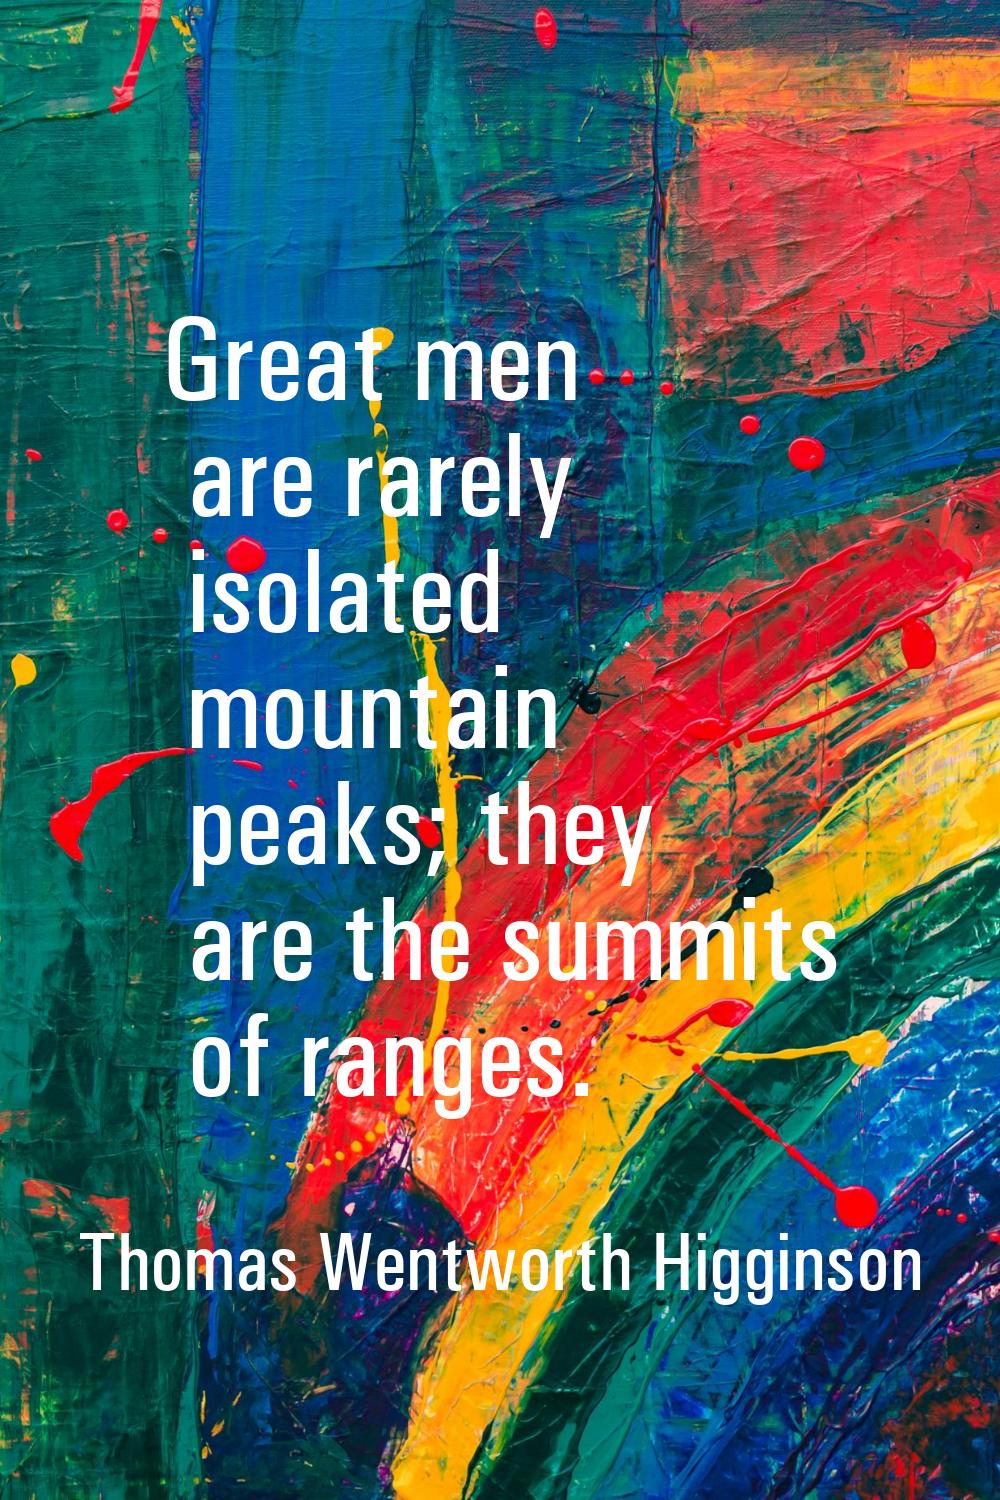 Great men are rarely isolated mountain peaks; they are the summits of ranges.